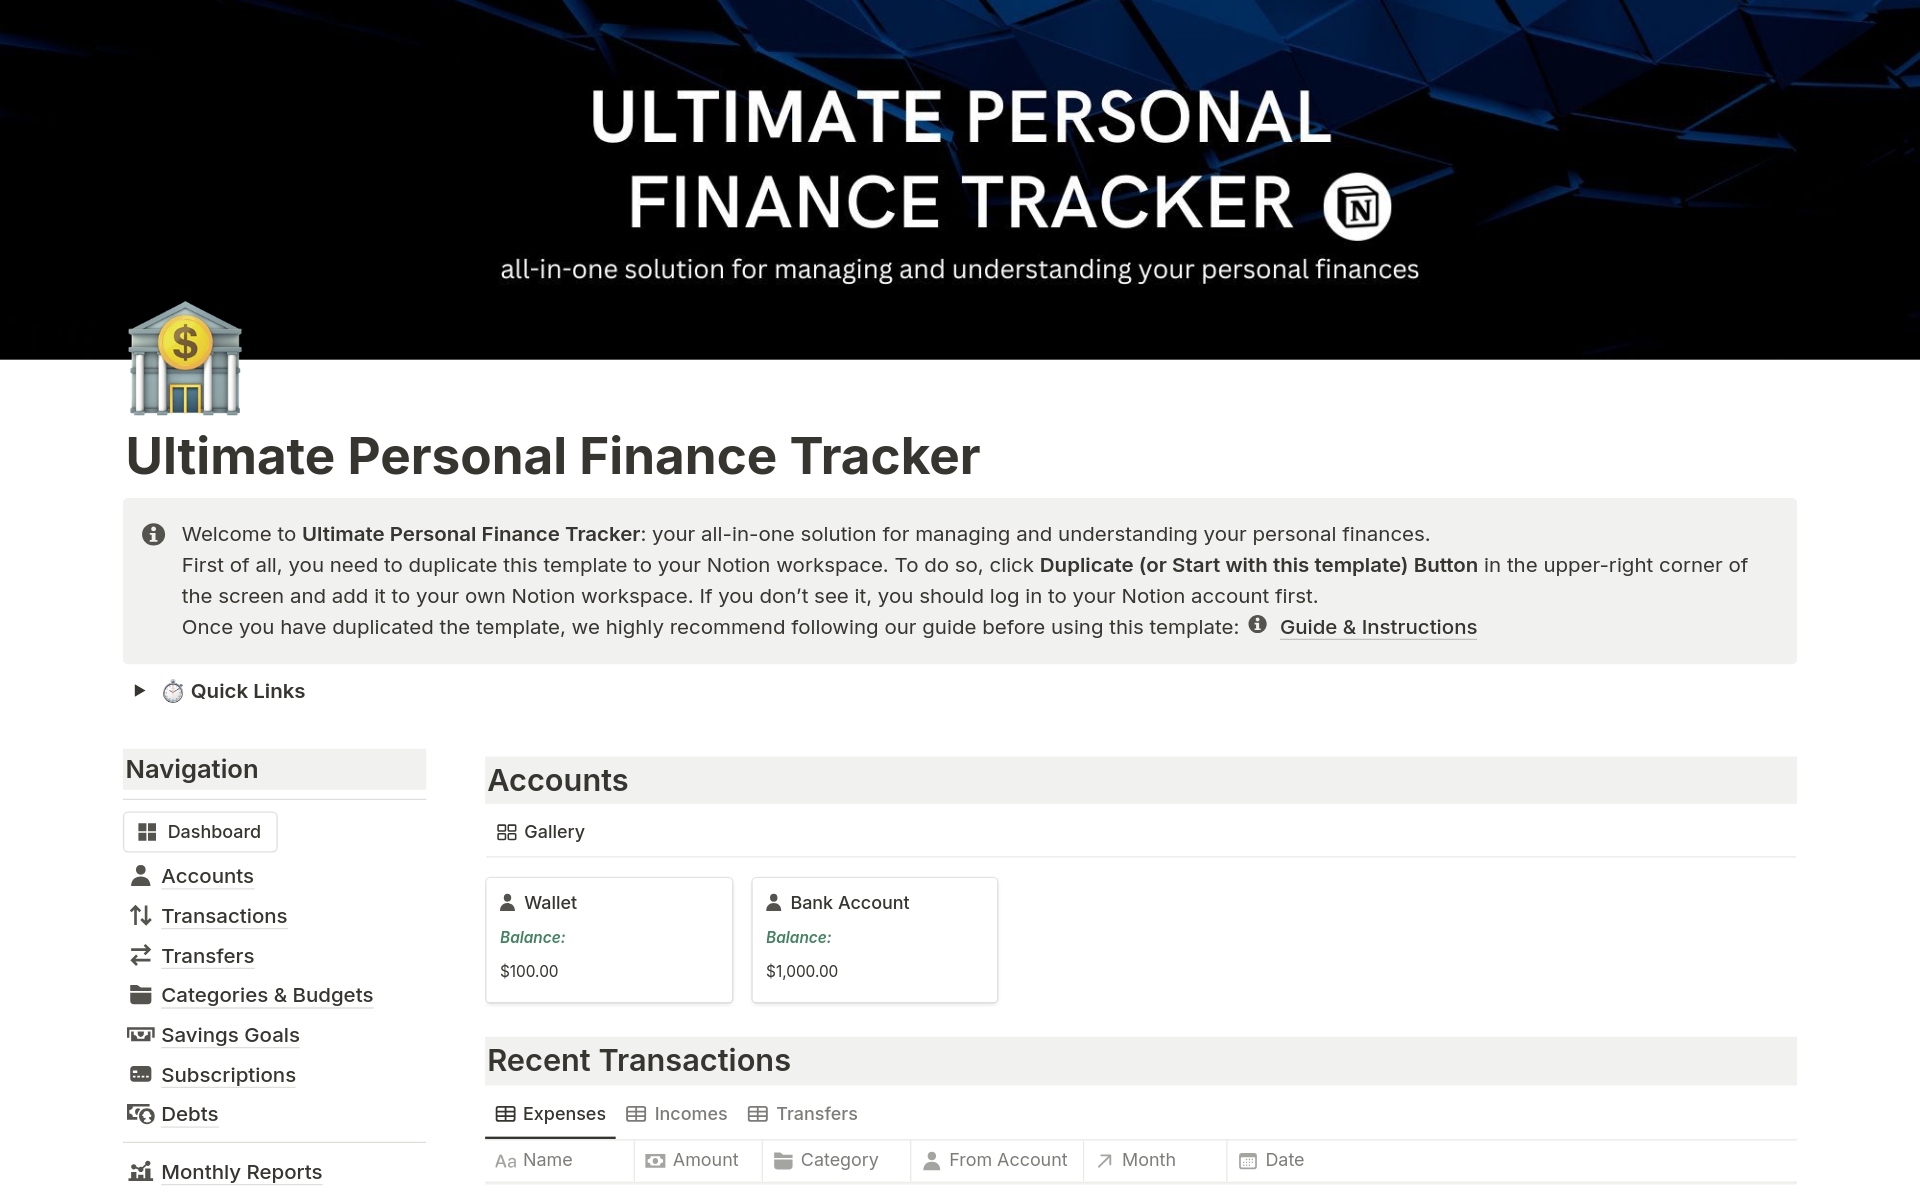 Your all-in-one solution for managing and understanding your personal finances.